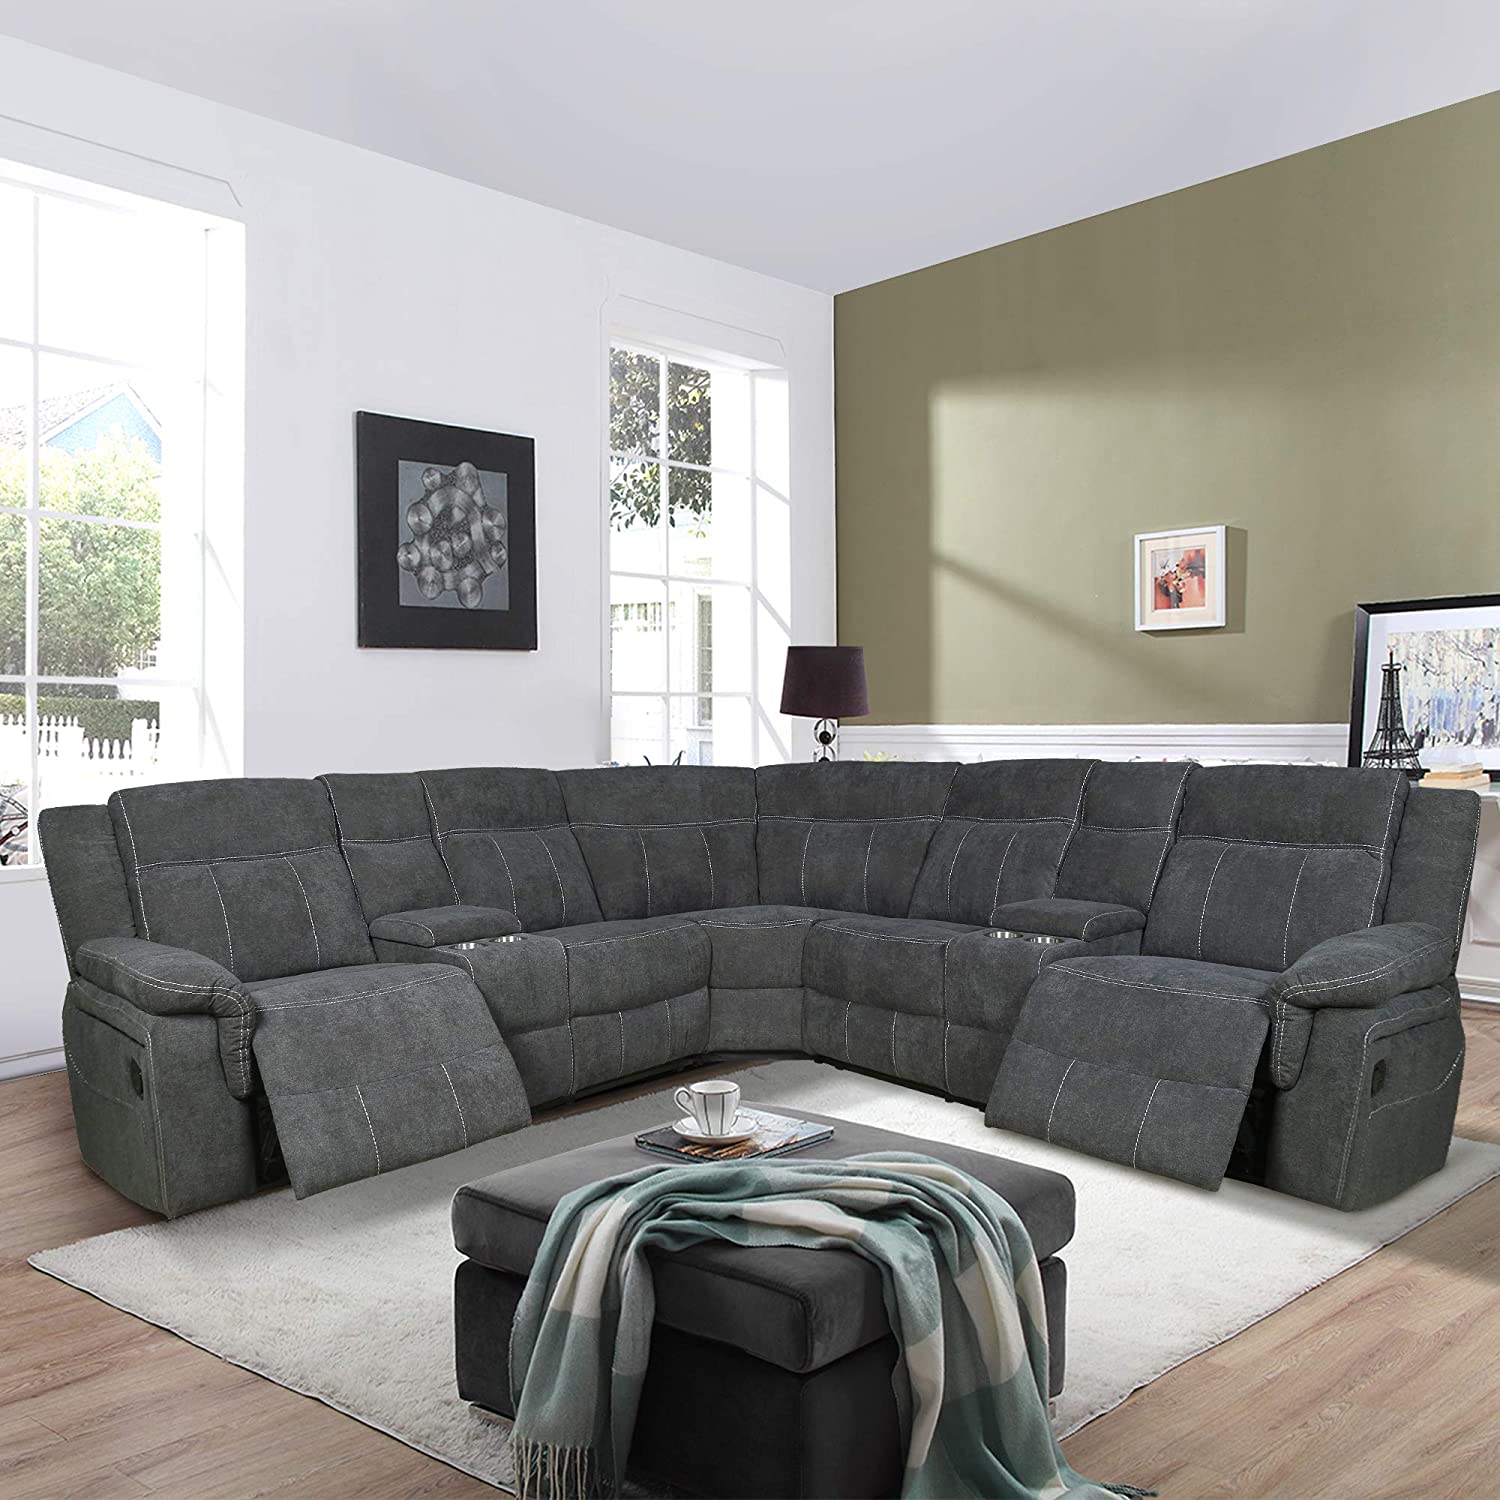 ThemagicHome Sectional Reclining Sofa For Living Room ?is Pending Load=1